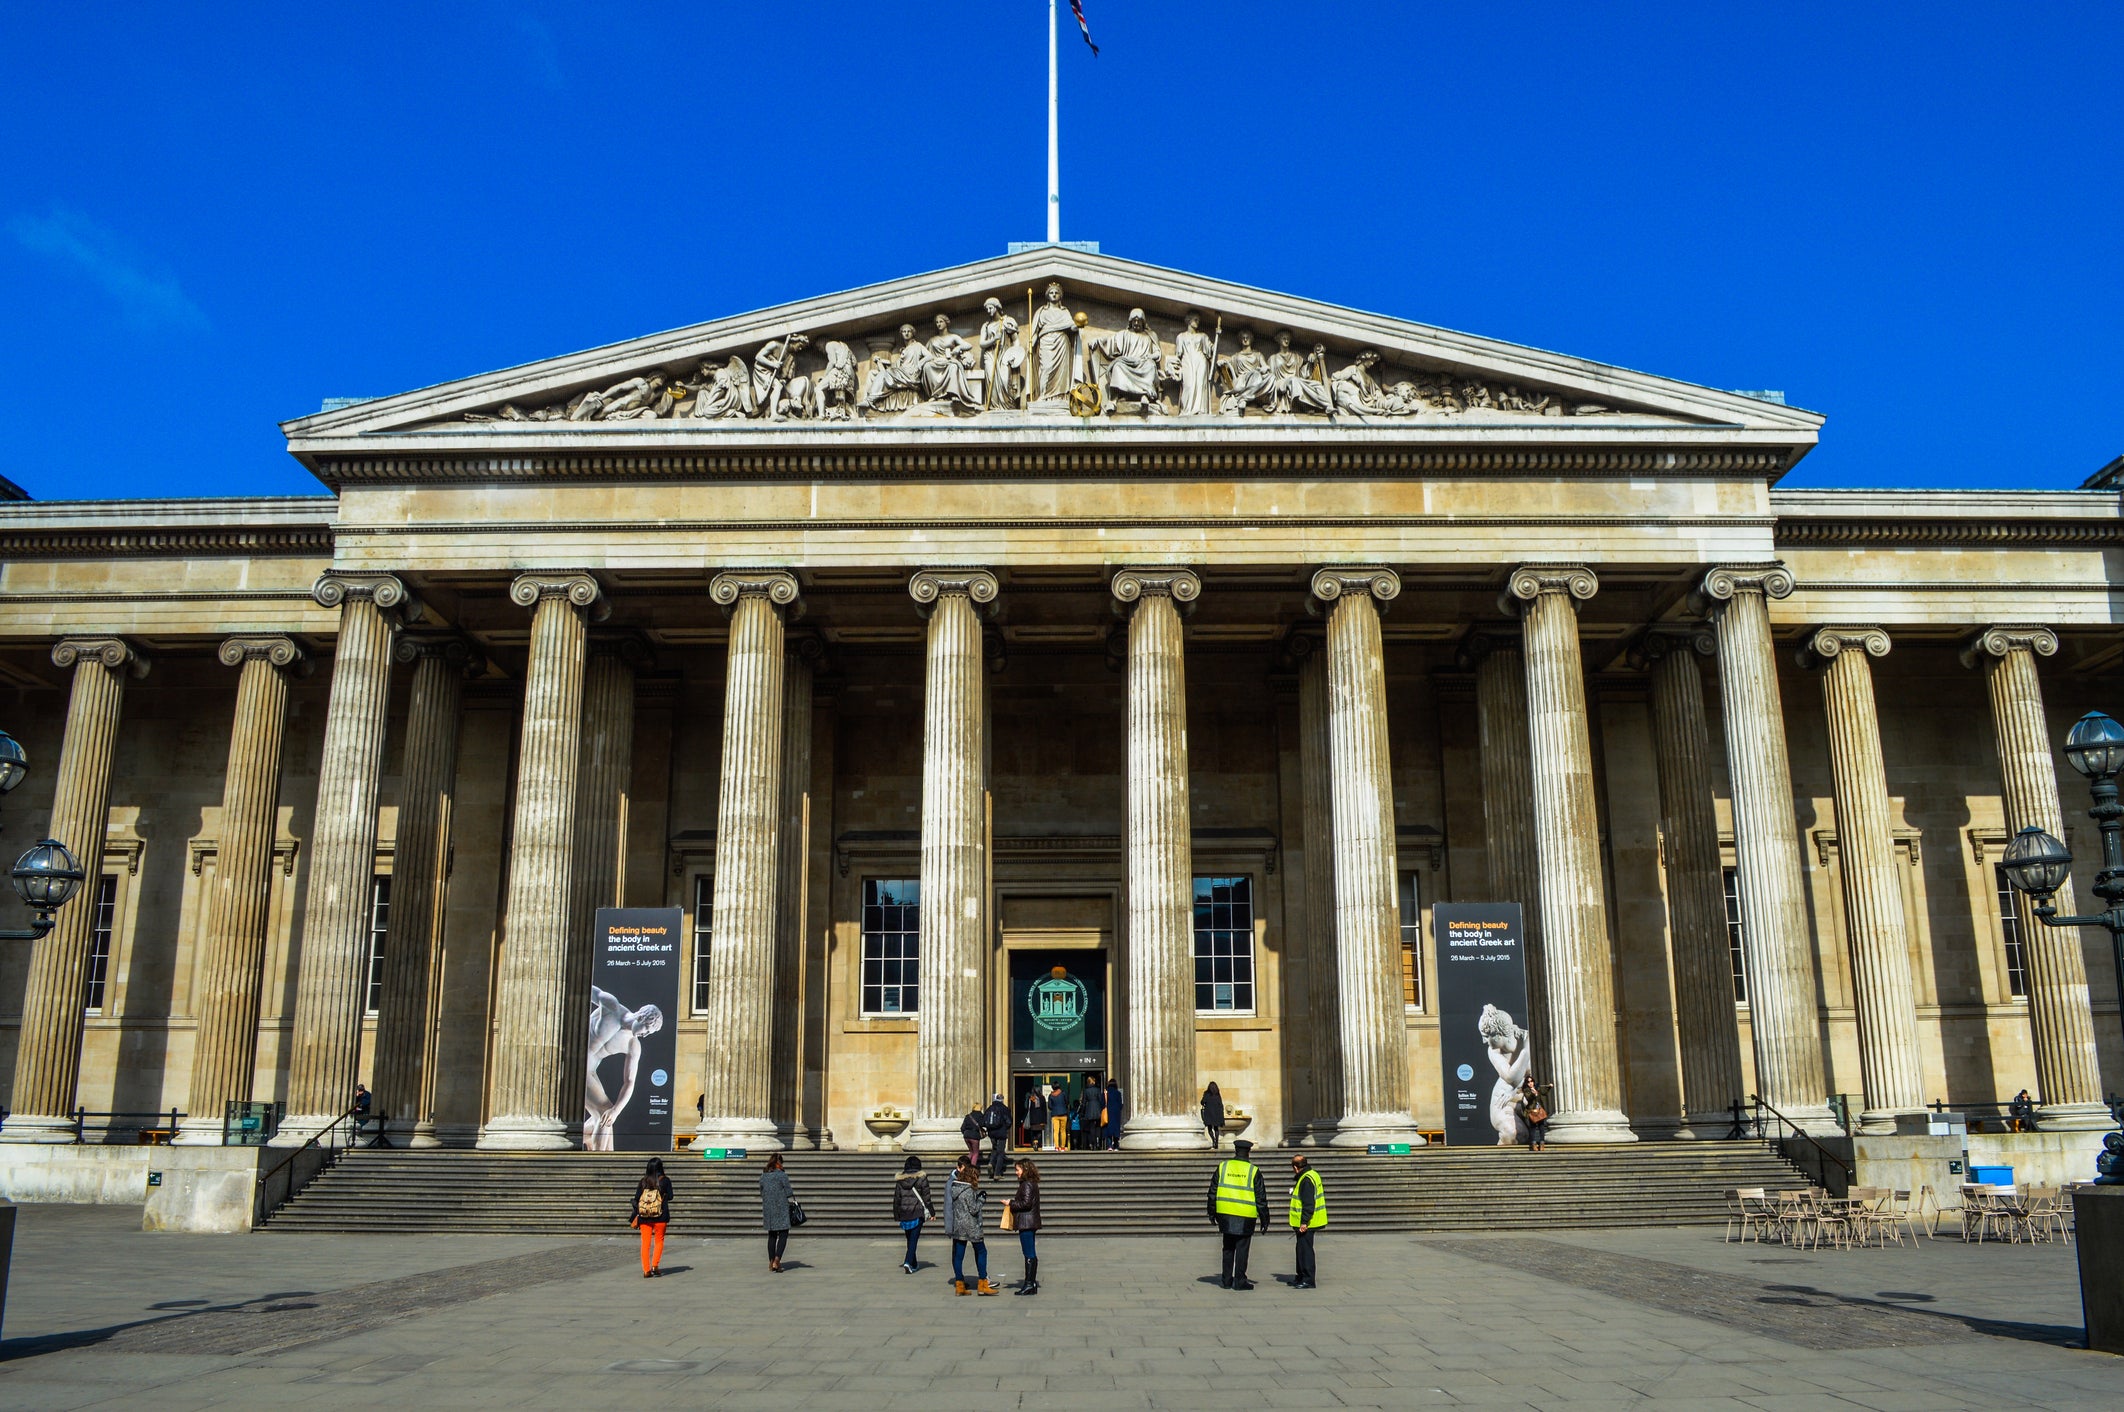 The museum requires renovation funds in the region of £500 million